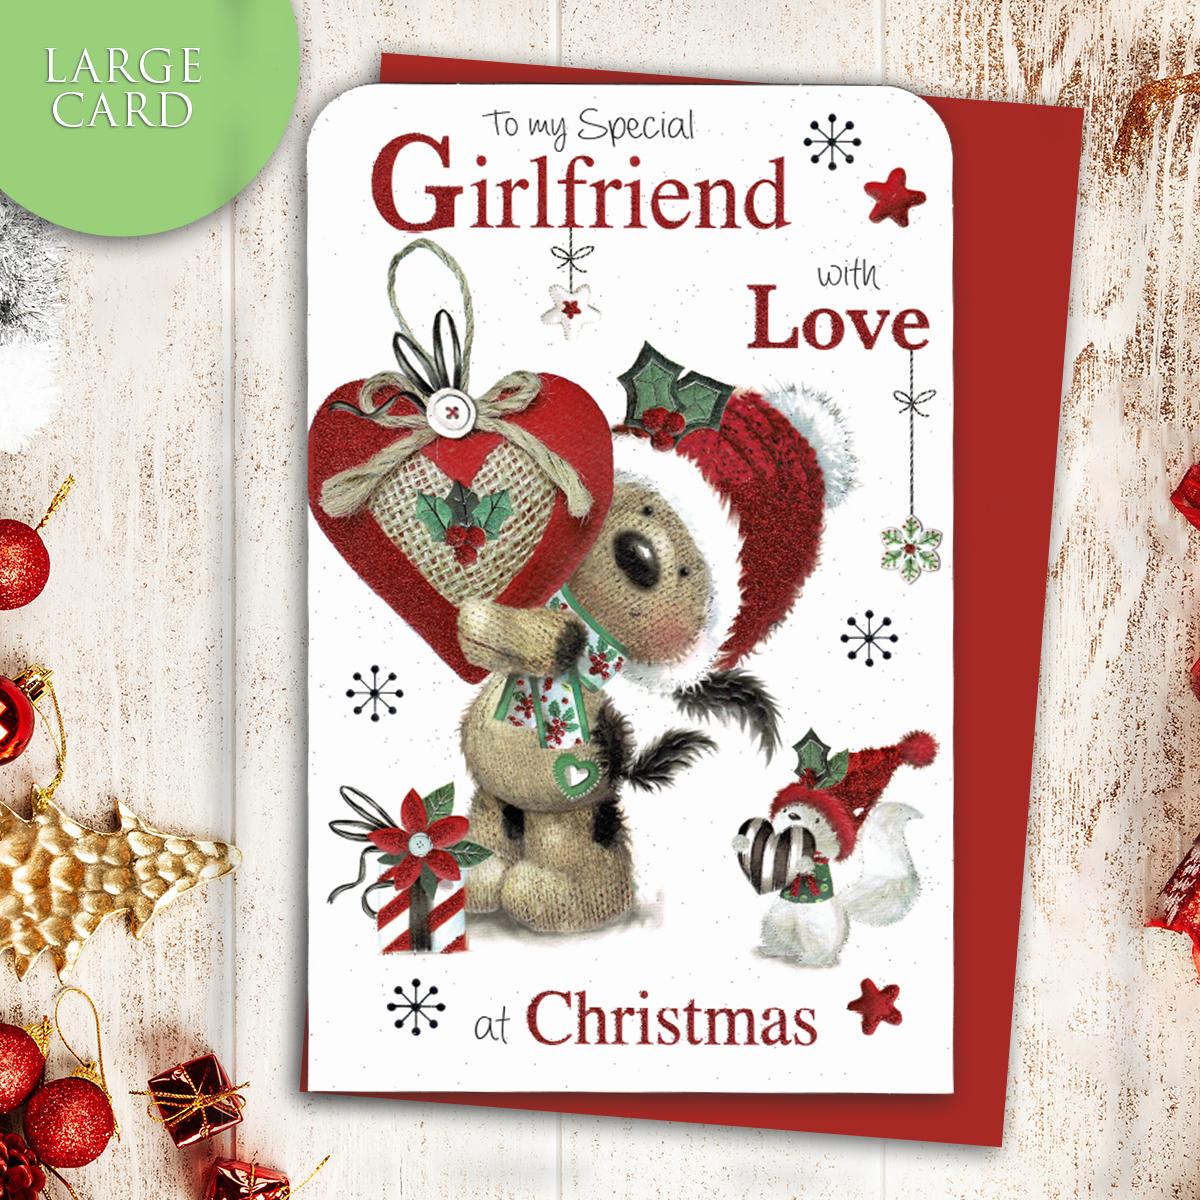 Special Girlfriend Christmas Card Alongside Its Red Envelope